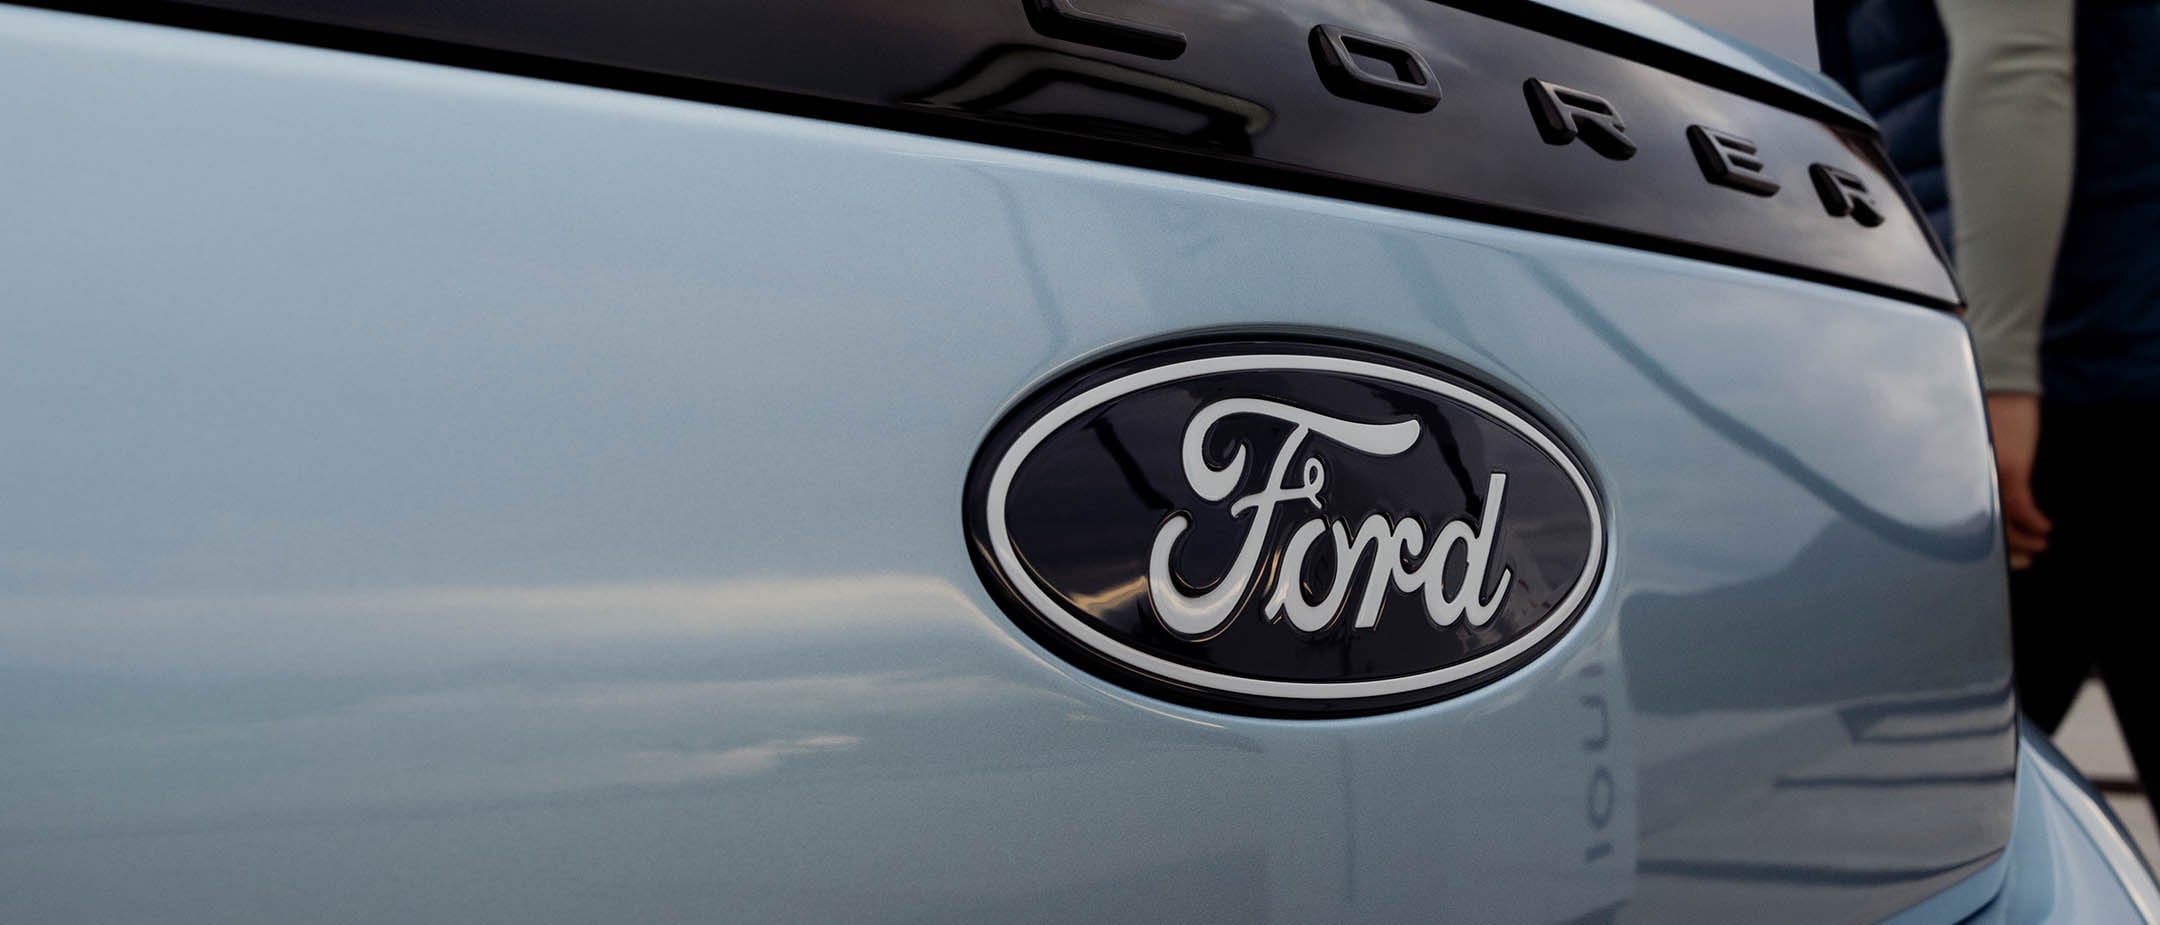 Running costs of Ford vehicles